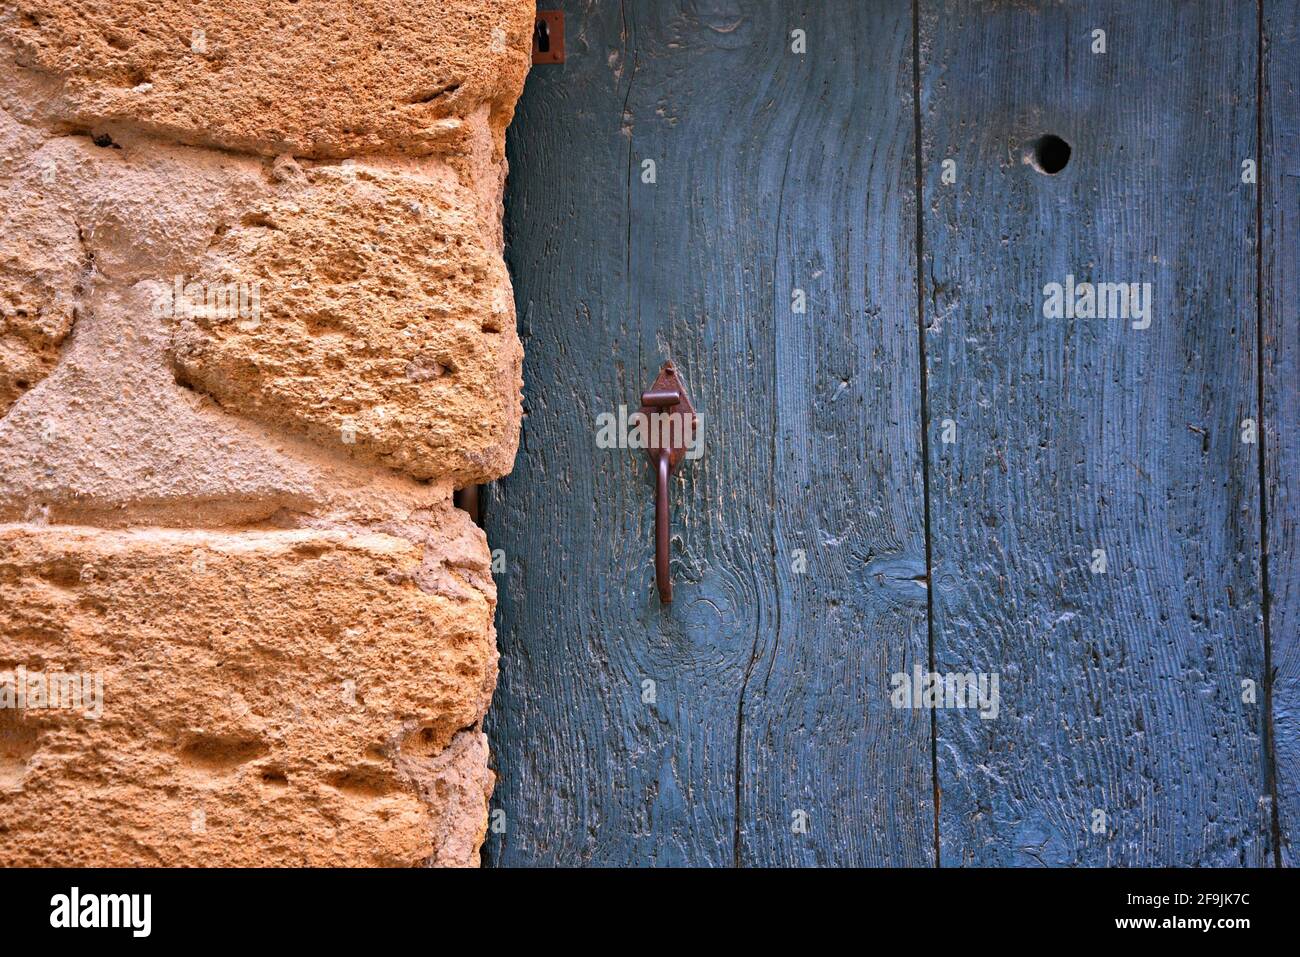 Typical Provençal style blue weathered wooden door on a stone wall in the picturesque village of Lourmarin in Vaucluse, Provence France. Stock Photo